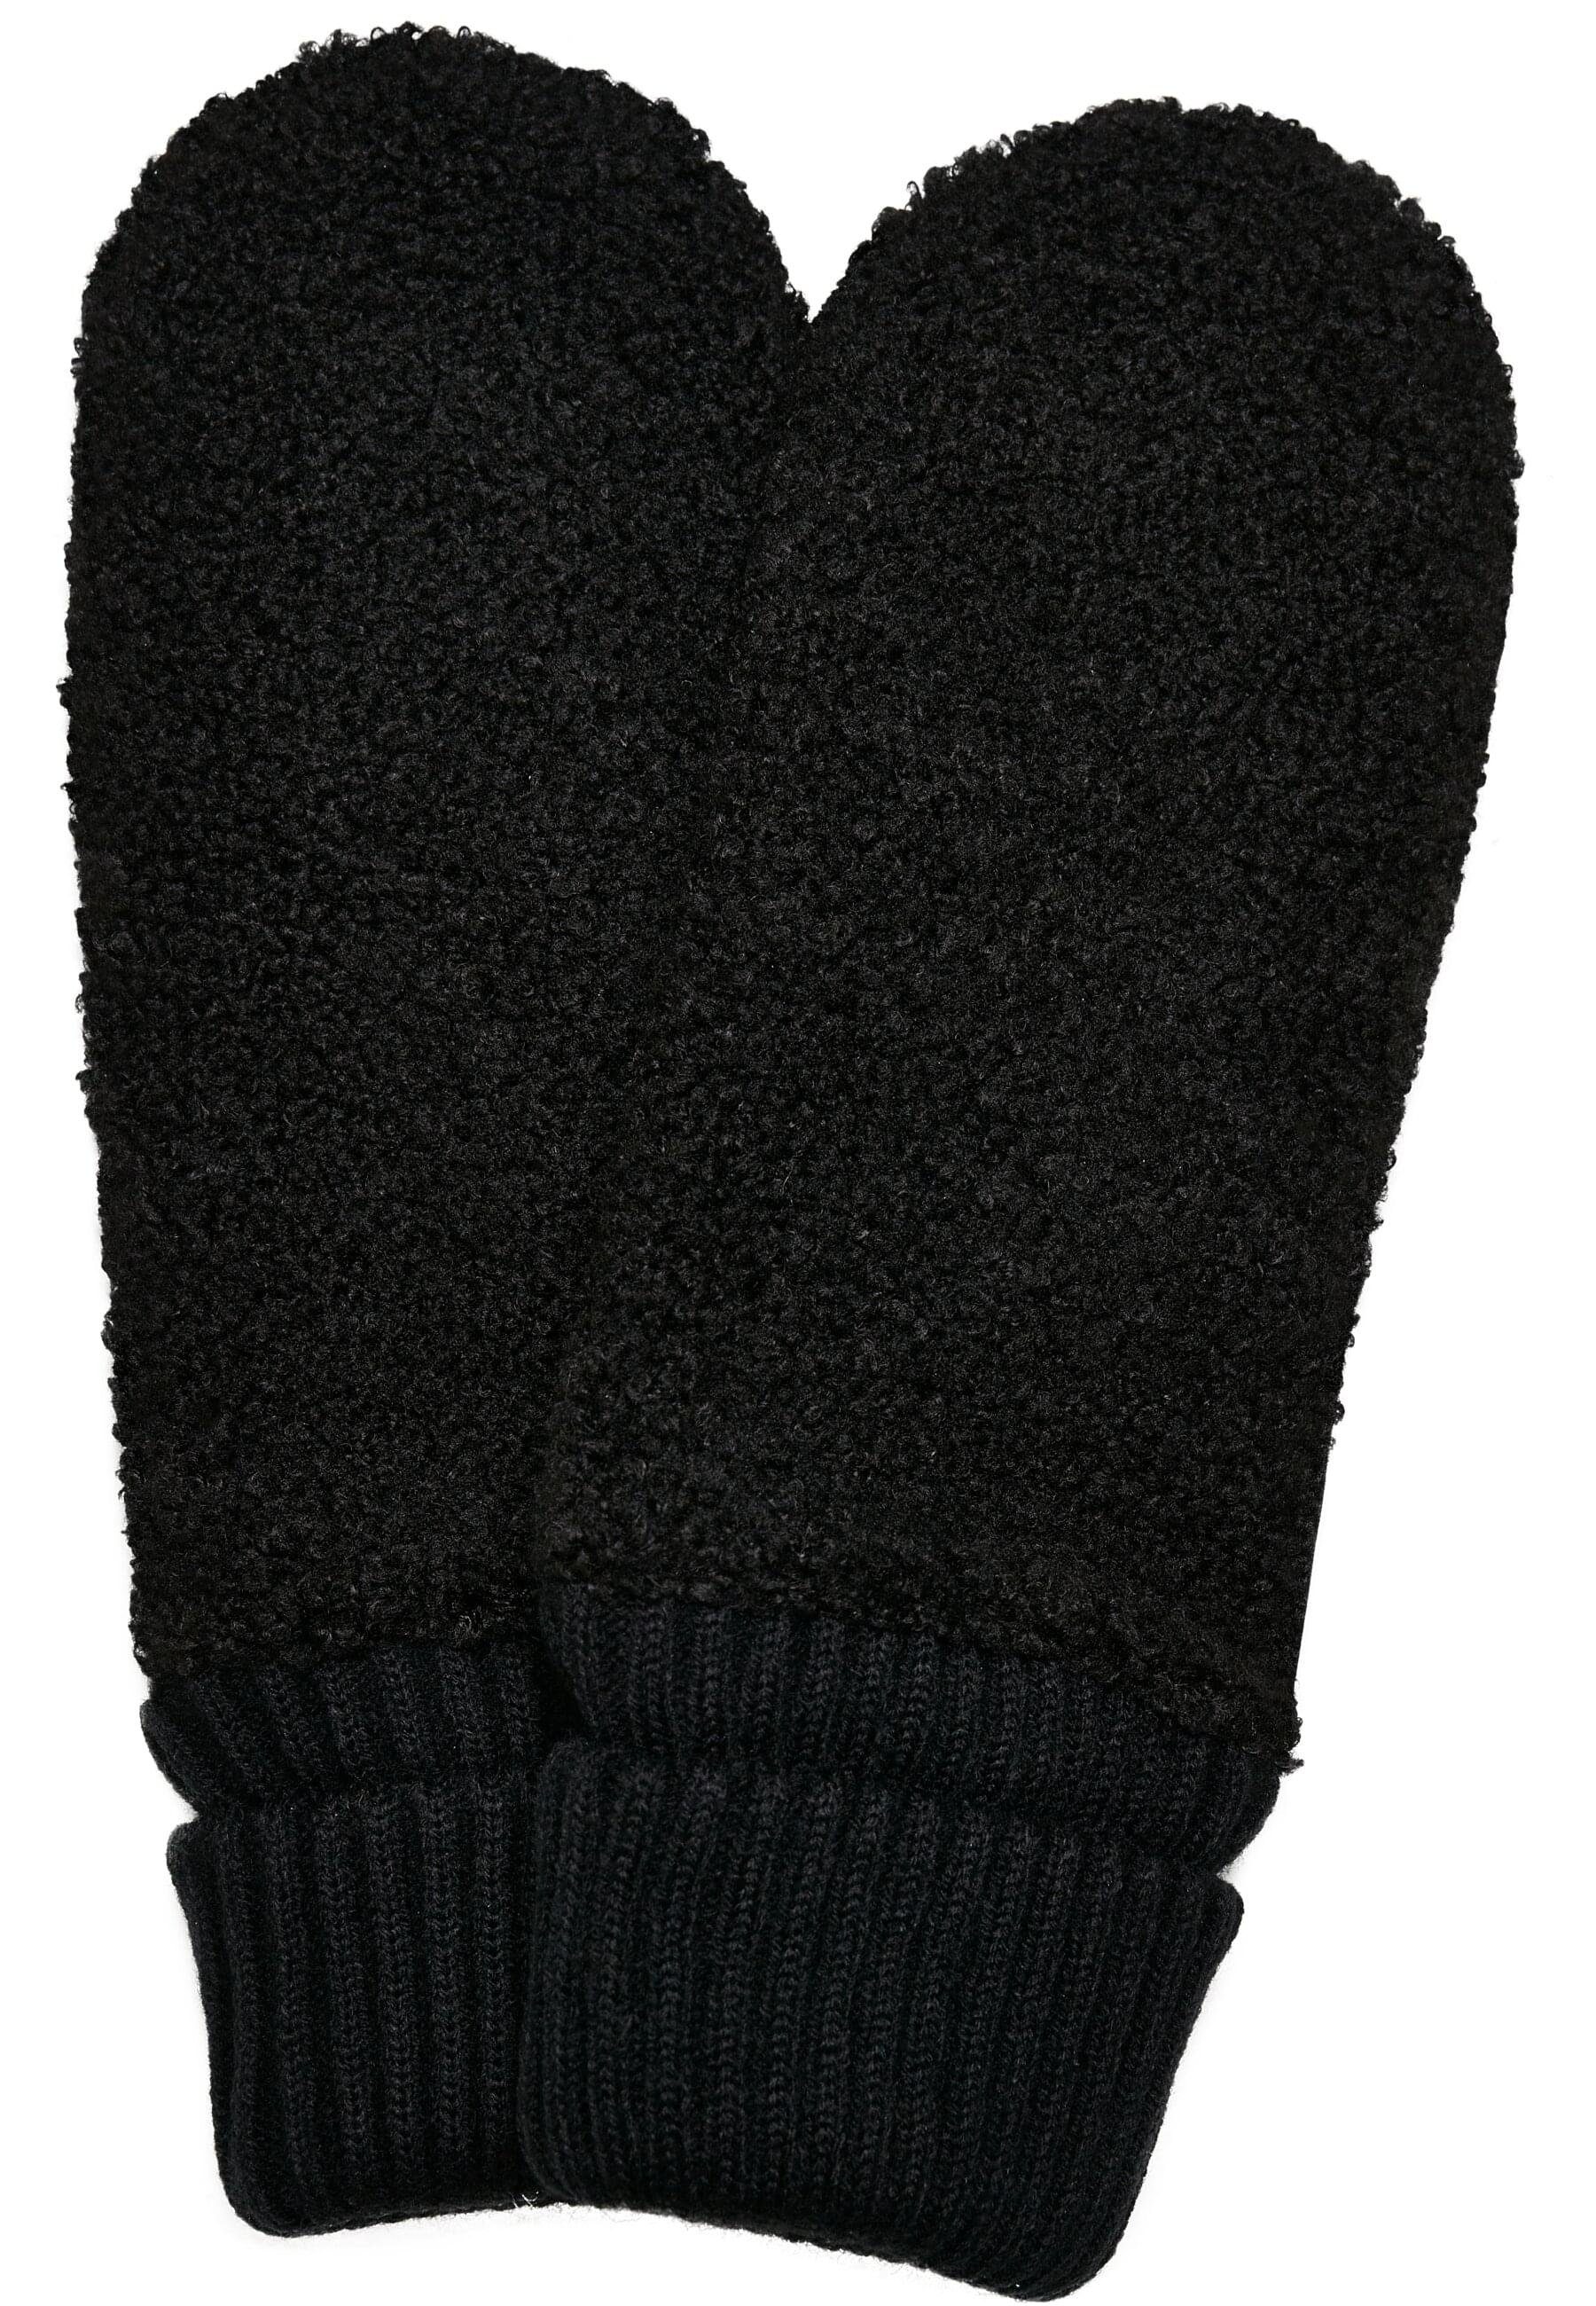 CLASSICS Leather Synthetic Baumwollhandschuhe Gloves URBAN Unisex Sherpa